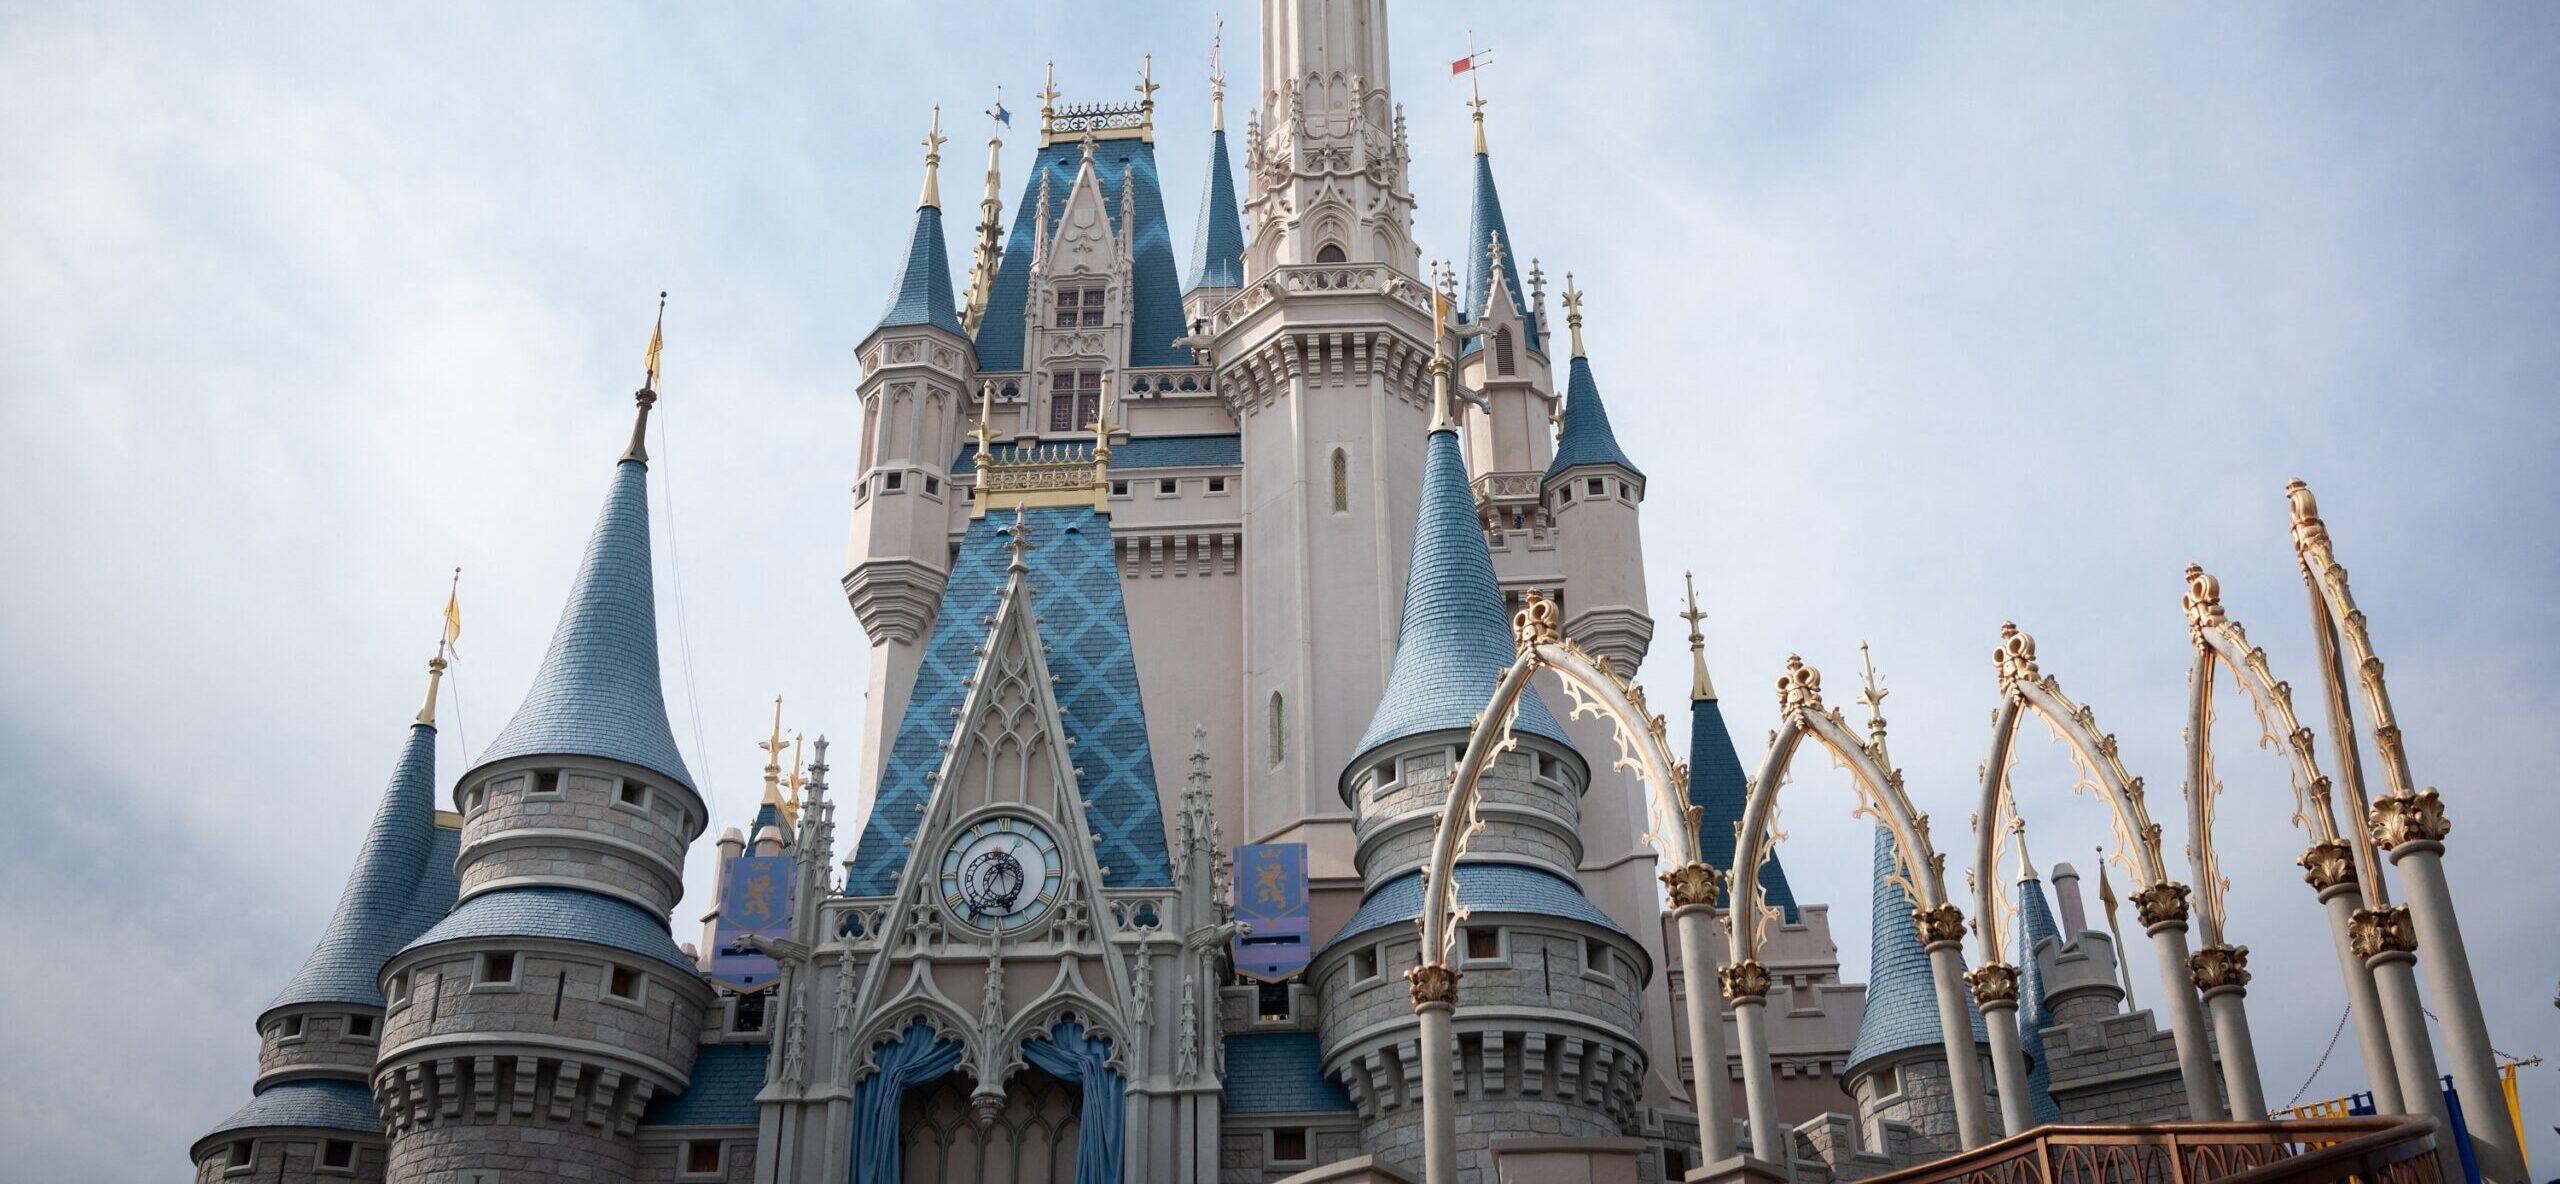 Parents Charged With Child Neglect After Getting Highly Intoxicated At Disney World